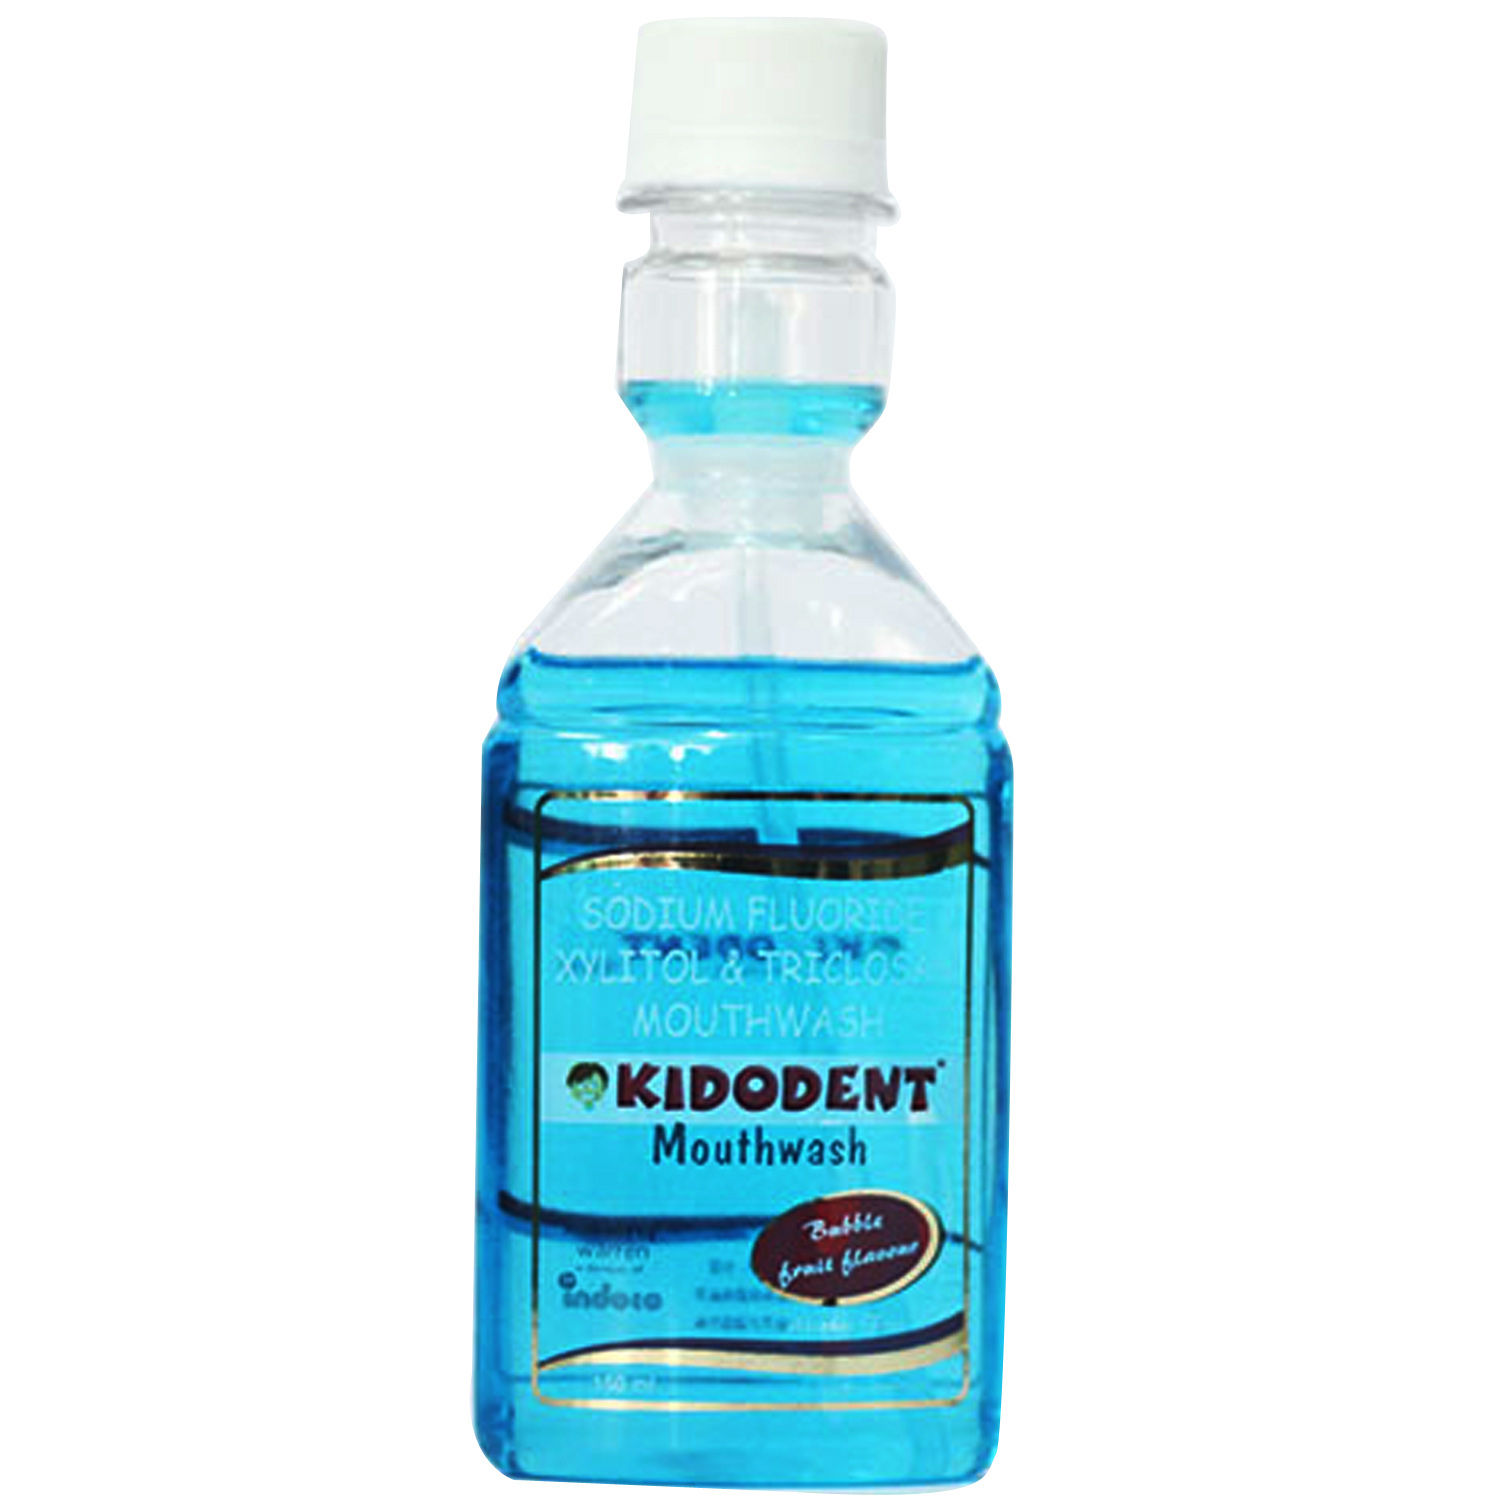 Kidodent Mouthwash, 100 ml, Pack of 1 